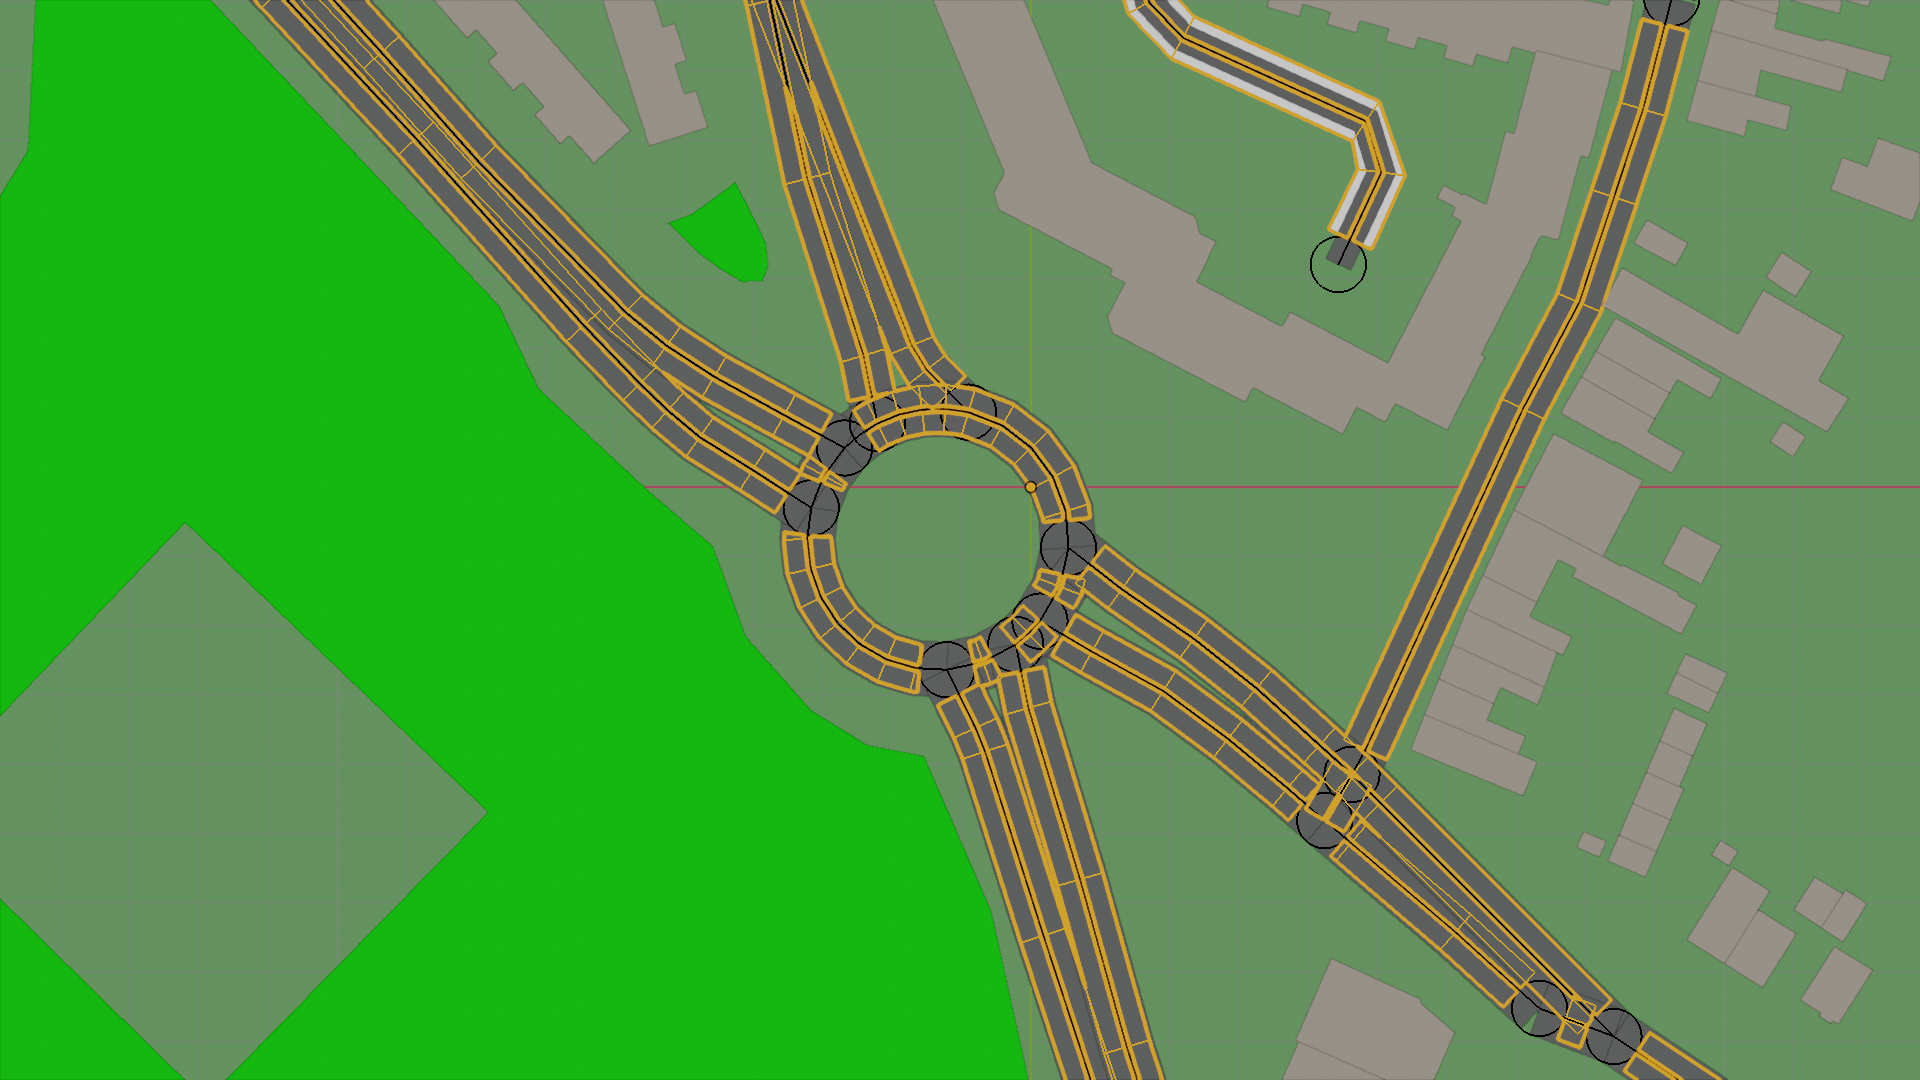 ../../_images/view3d-traffic-osm-traffic-system.png